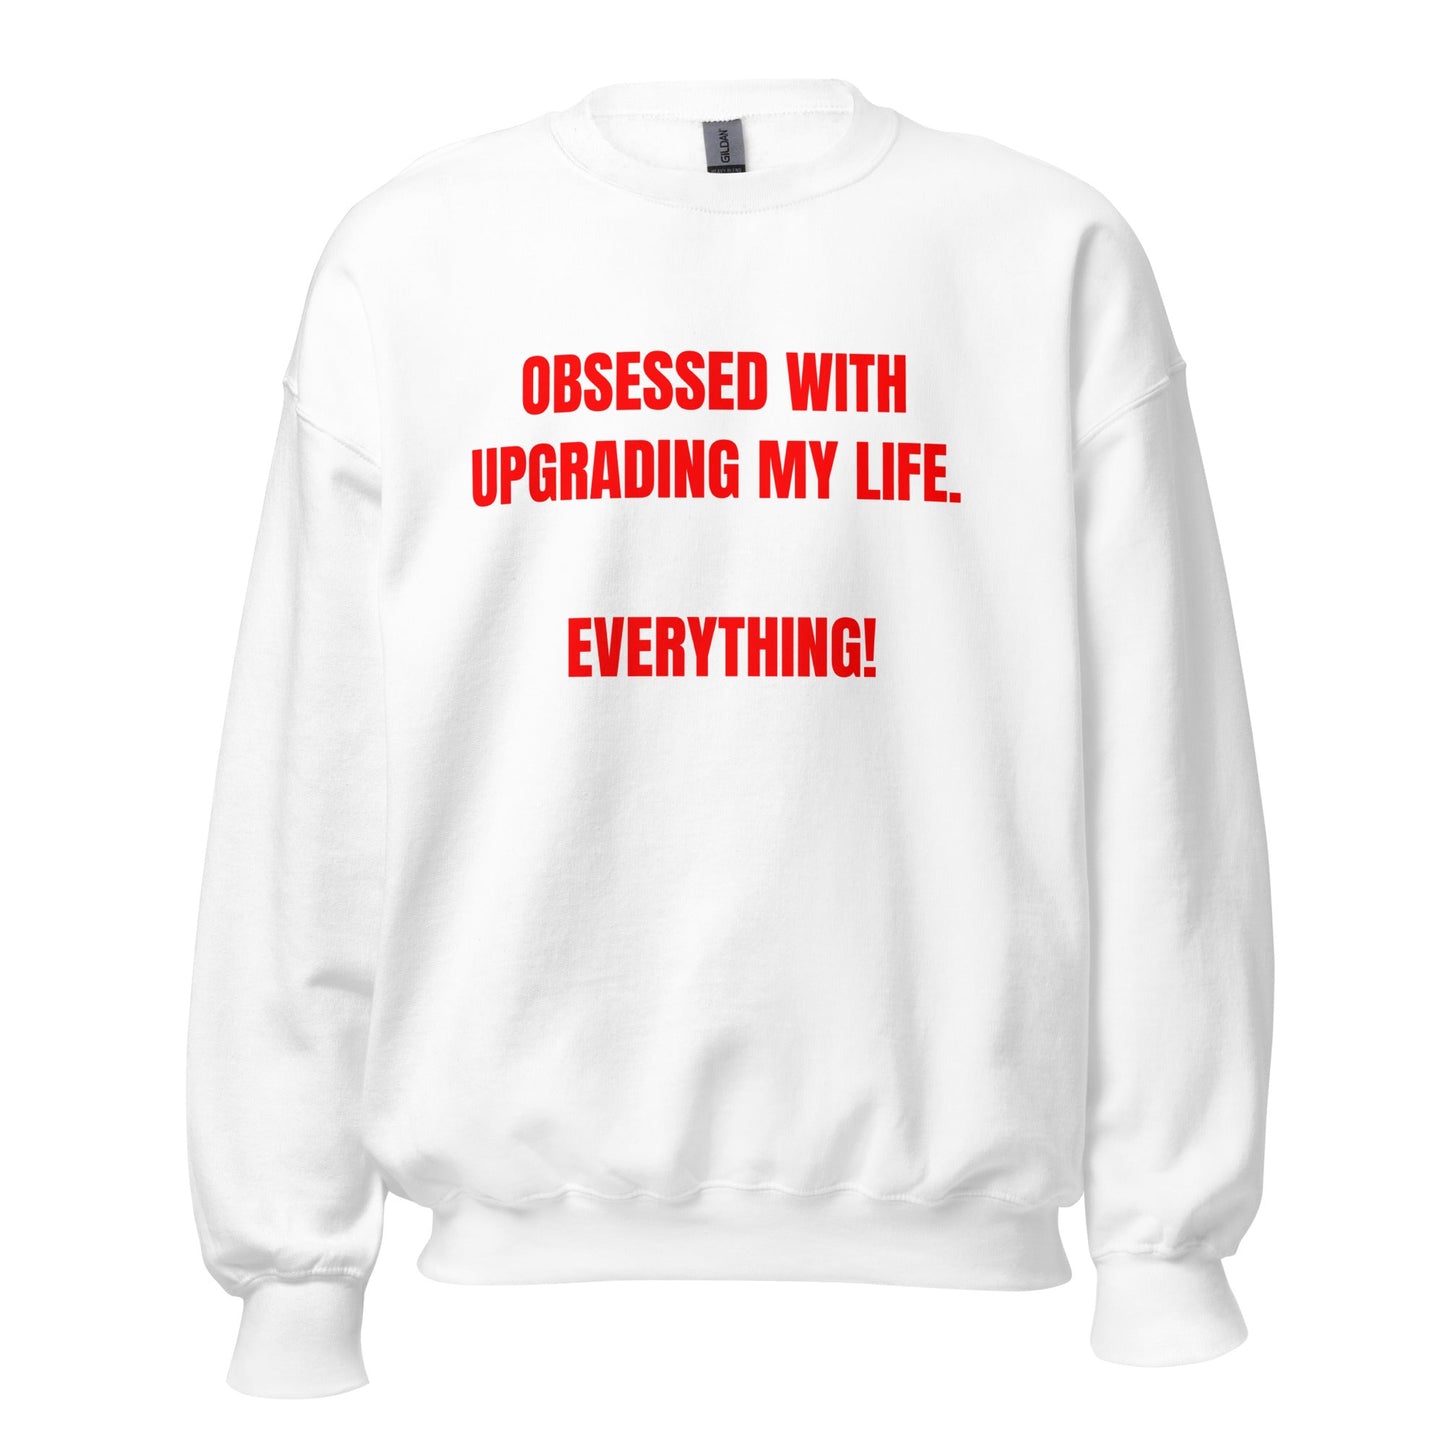 Obsessed With Upgrading My Life I Deserve Everything! Unisex Sweatshirt - Catch This Tea Shirts